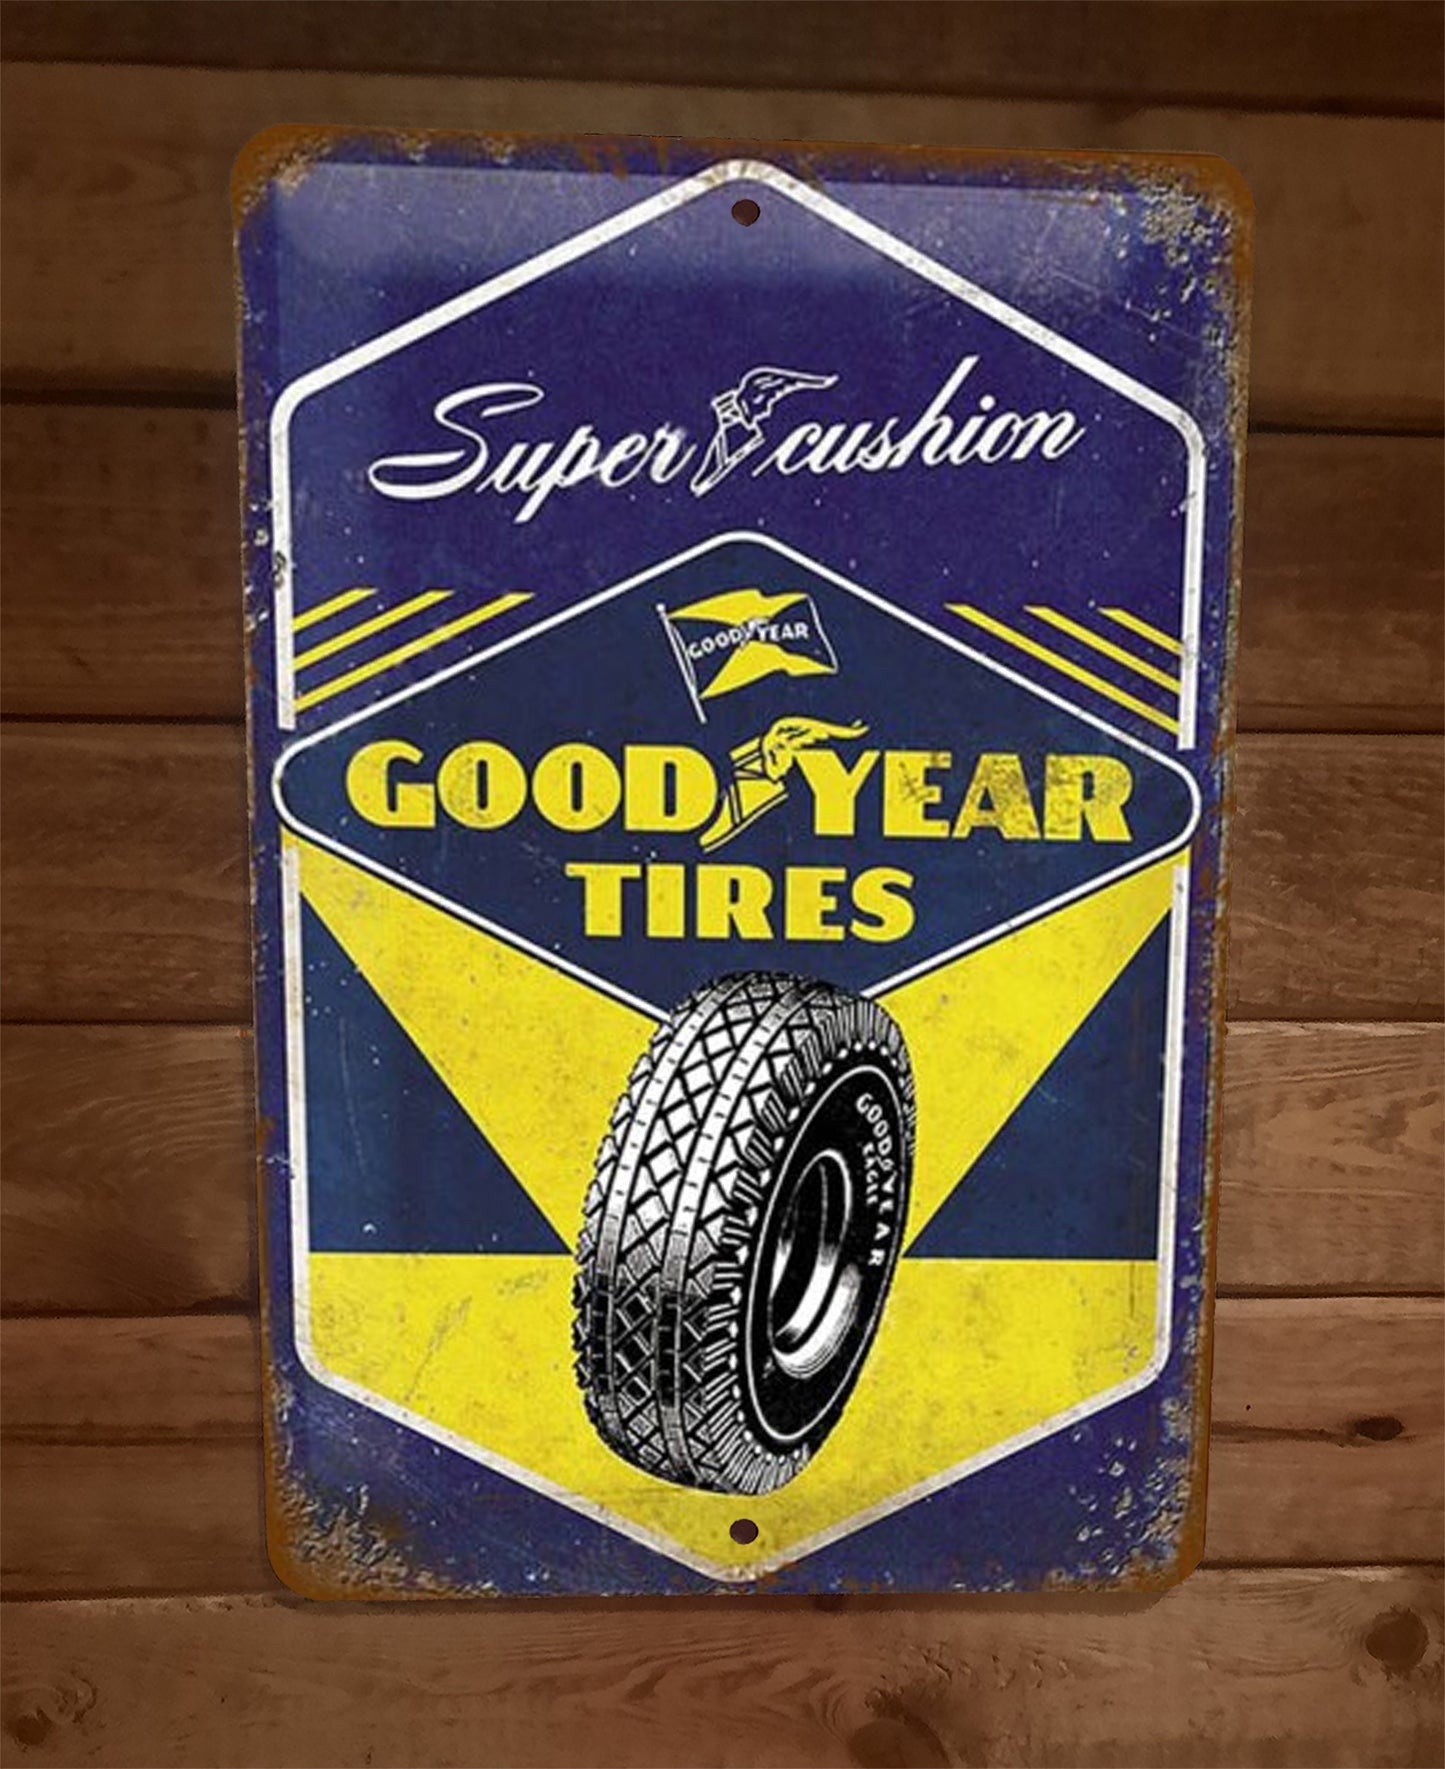 Good Year Tires Super Cushion Vintage Look 8x12 Metal Wall Sign Garage Poster